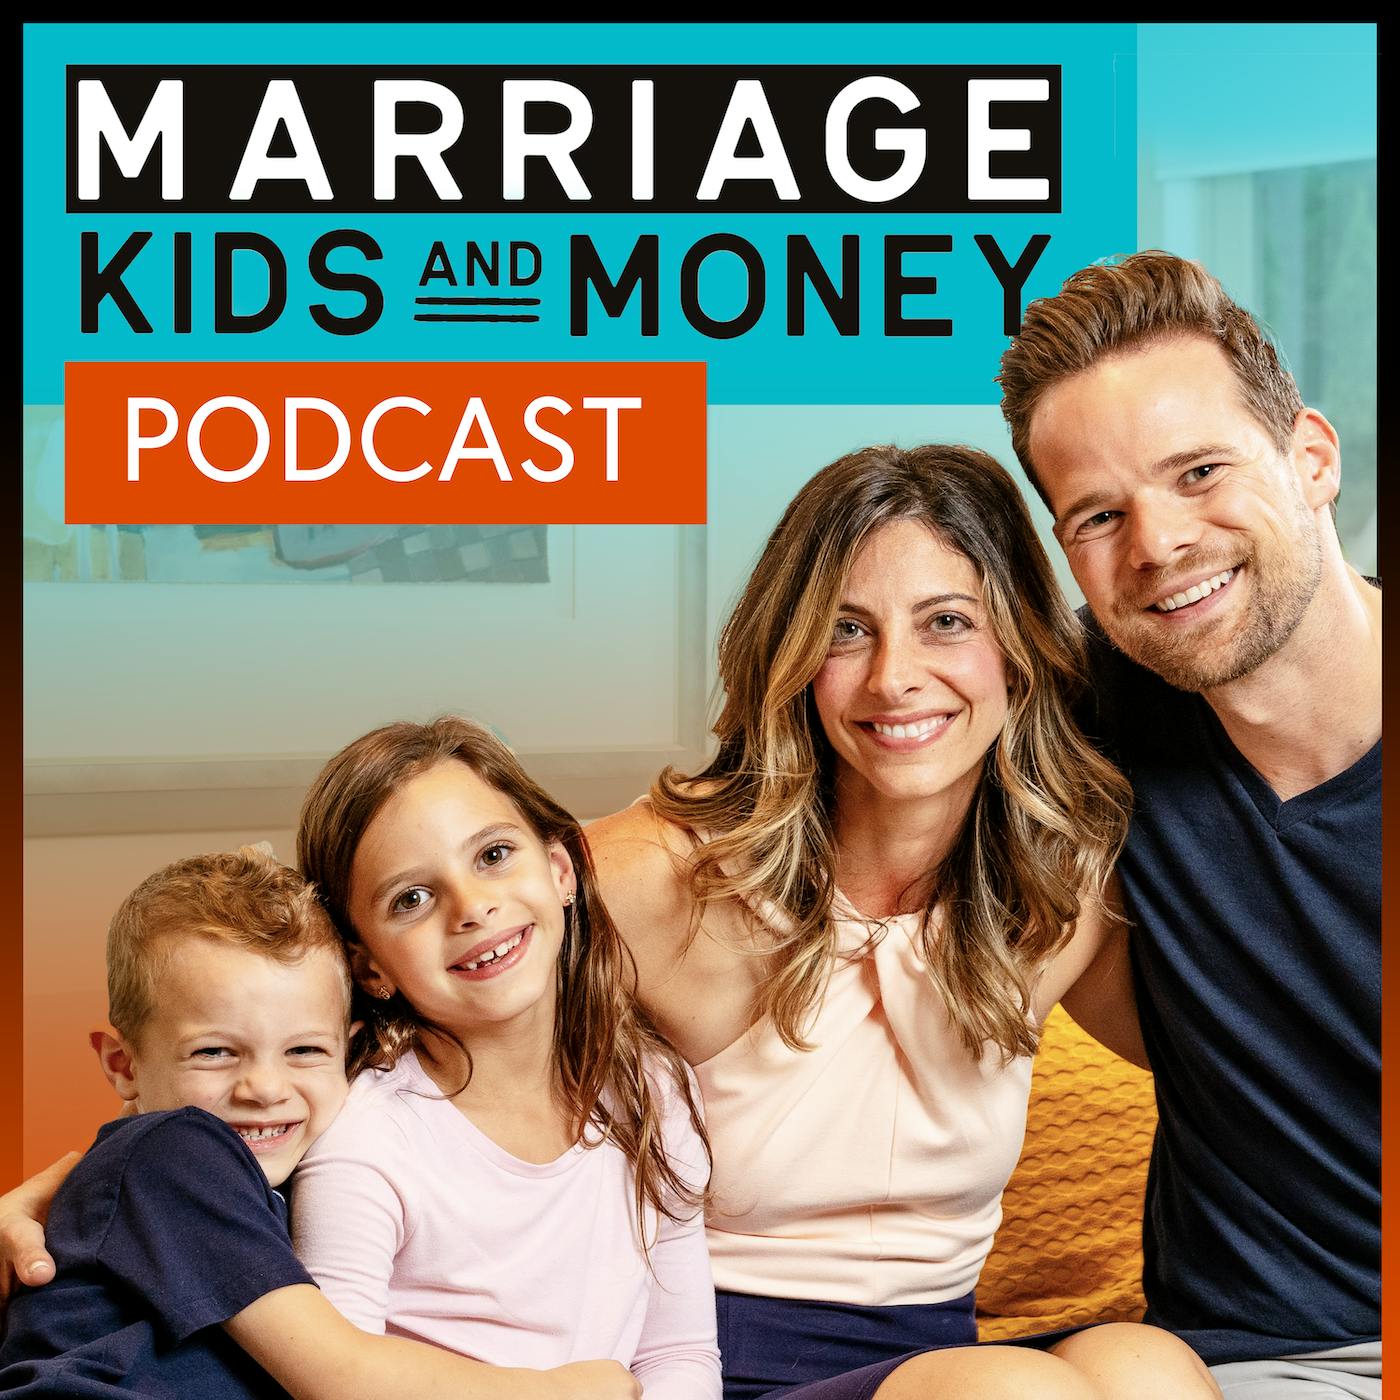 Boomerang Kids: How to Get Adult Children to Launch (w/ Bobbi Rebell) + Making 6-Figures as a Part-Time At Home Bookkeeper (w/ Tiffani Higgins)